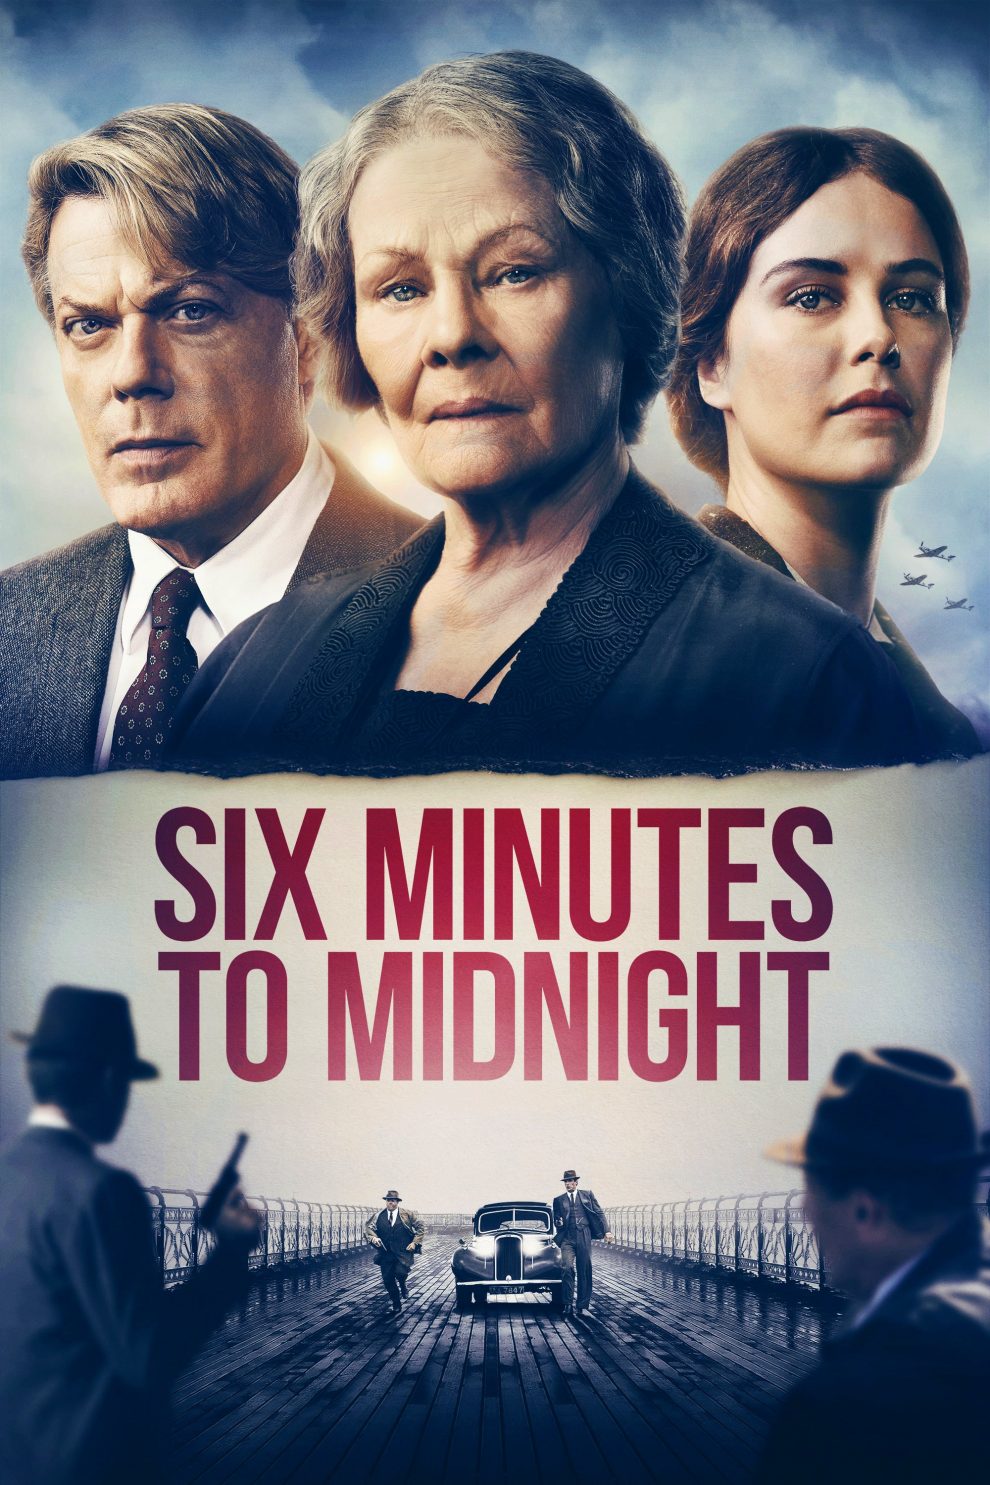 Poster for the movie "Six Minutes to Midnight"